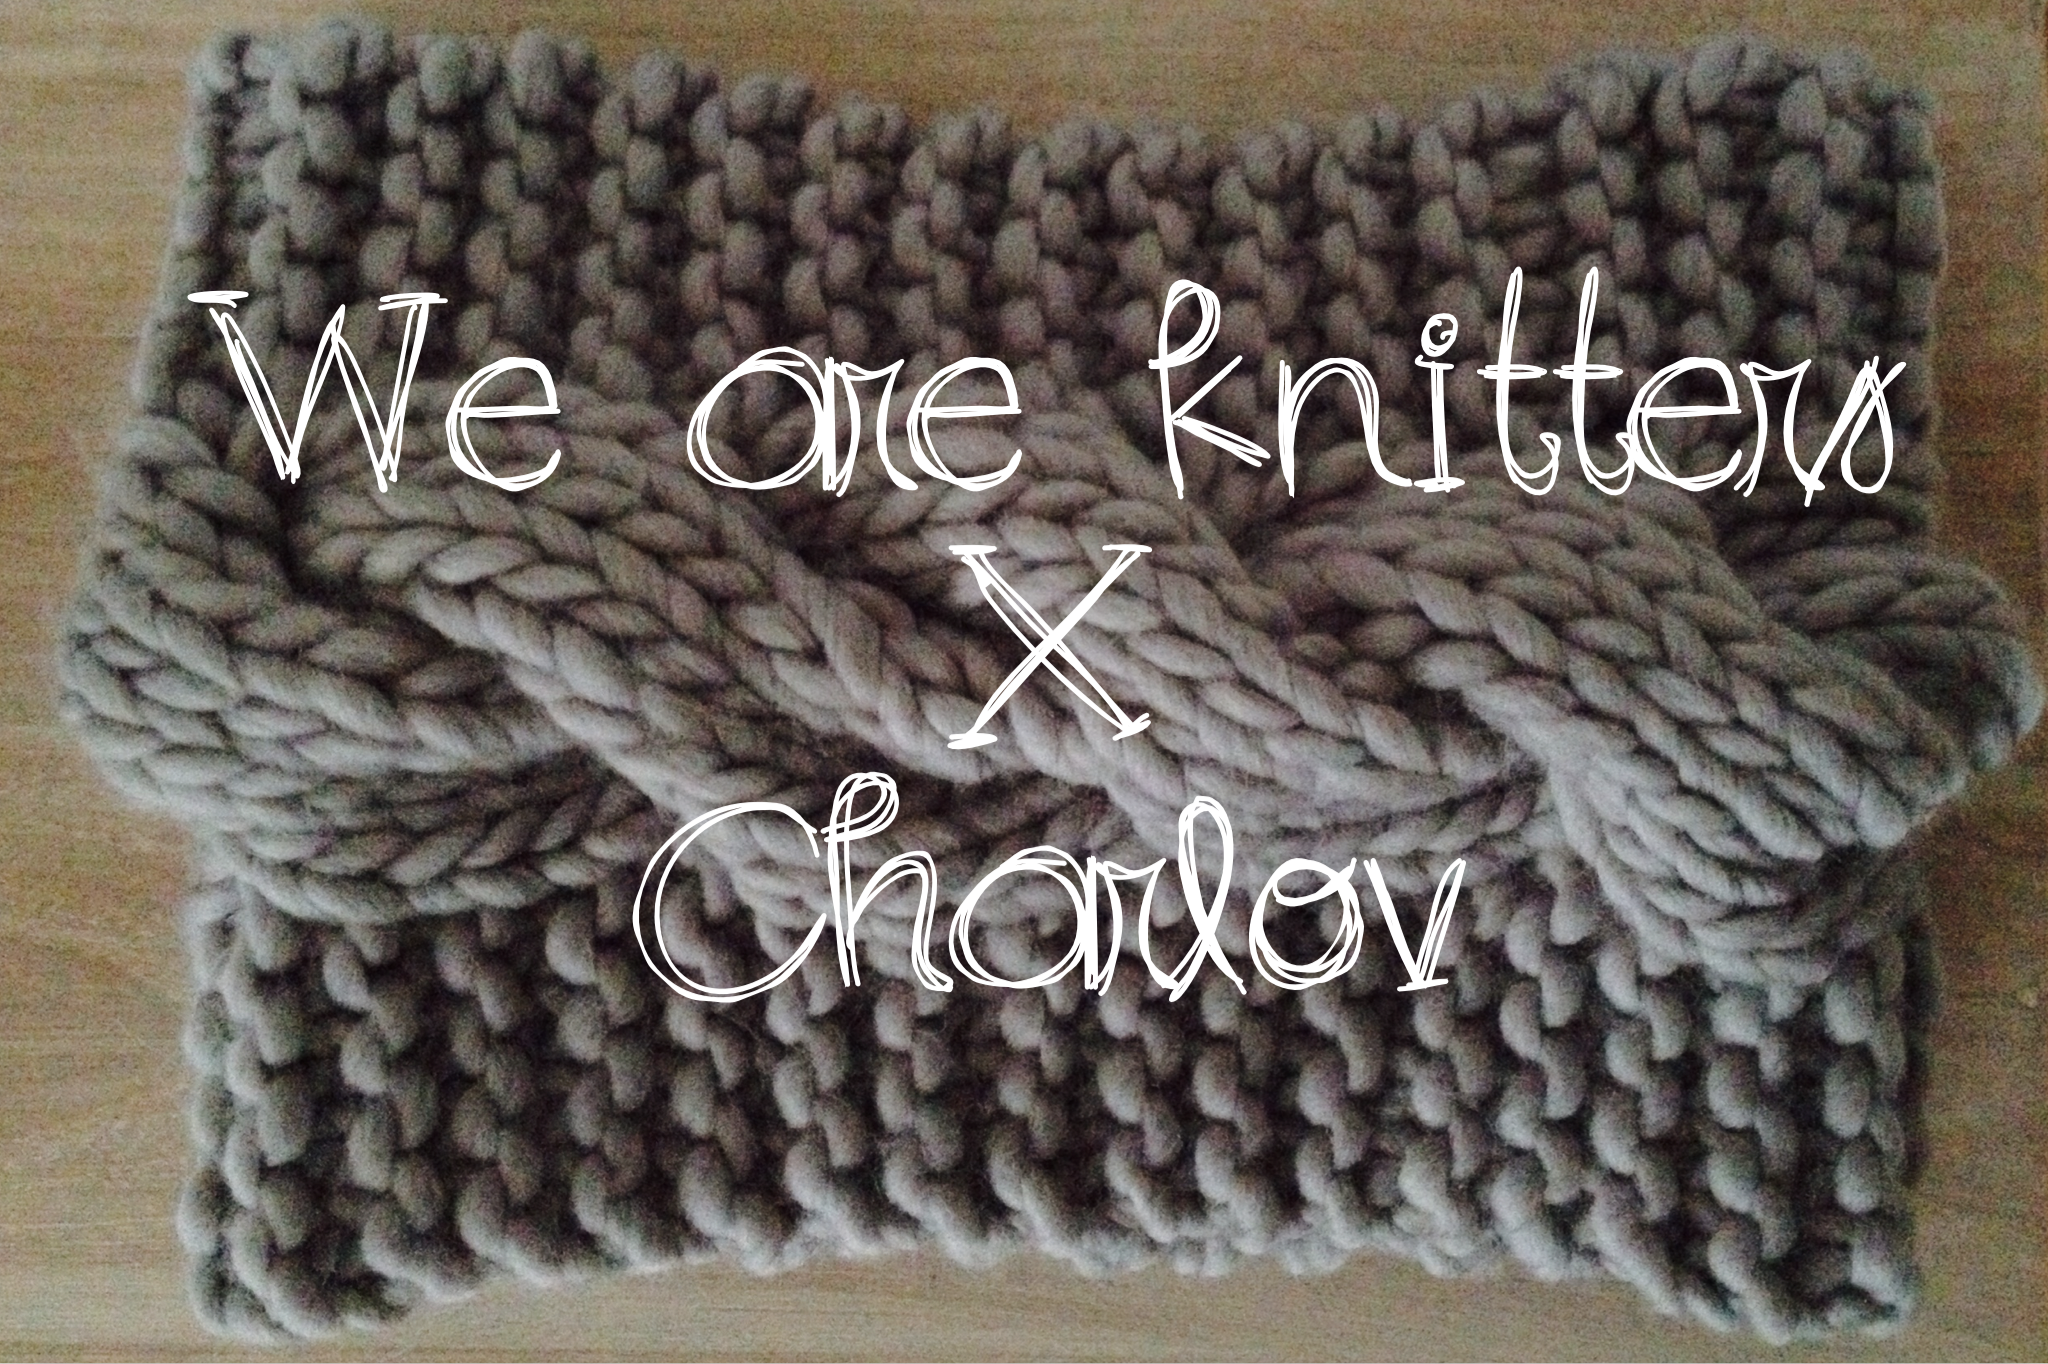 We Are Knitters x Charlov